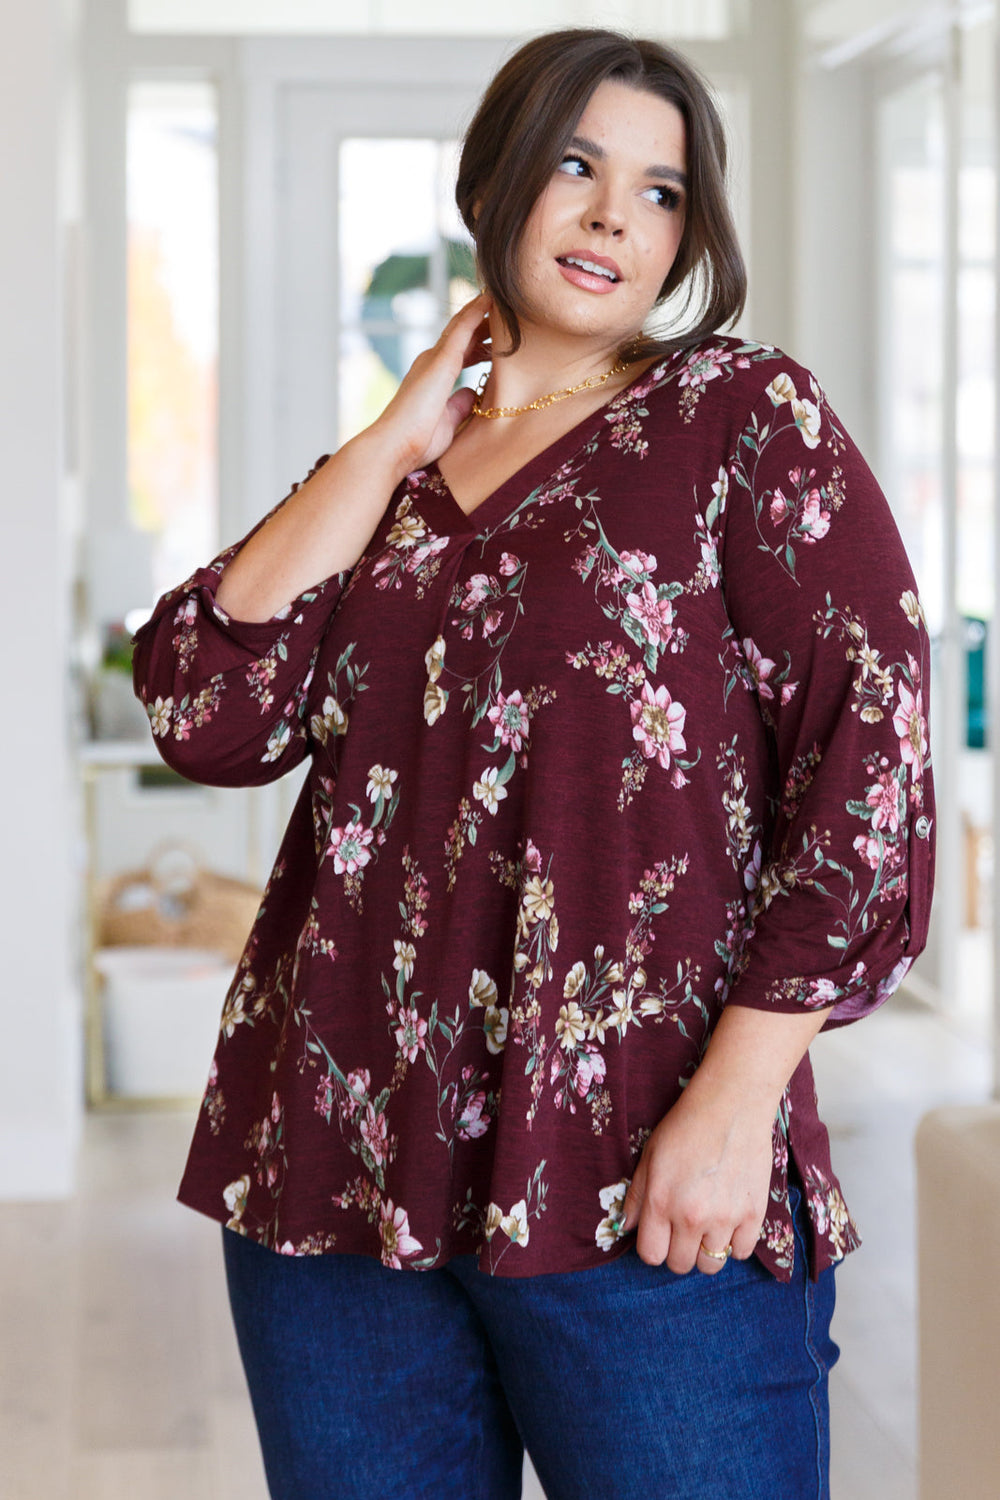 Hometown Classic Top in Wine Floral-Long Sleeve Tops-Inspired by Justeen-Women's Clothing Boutique in Chicago, Illinois